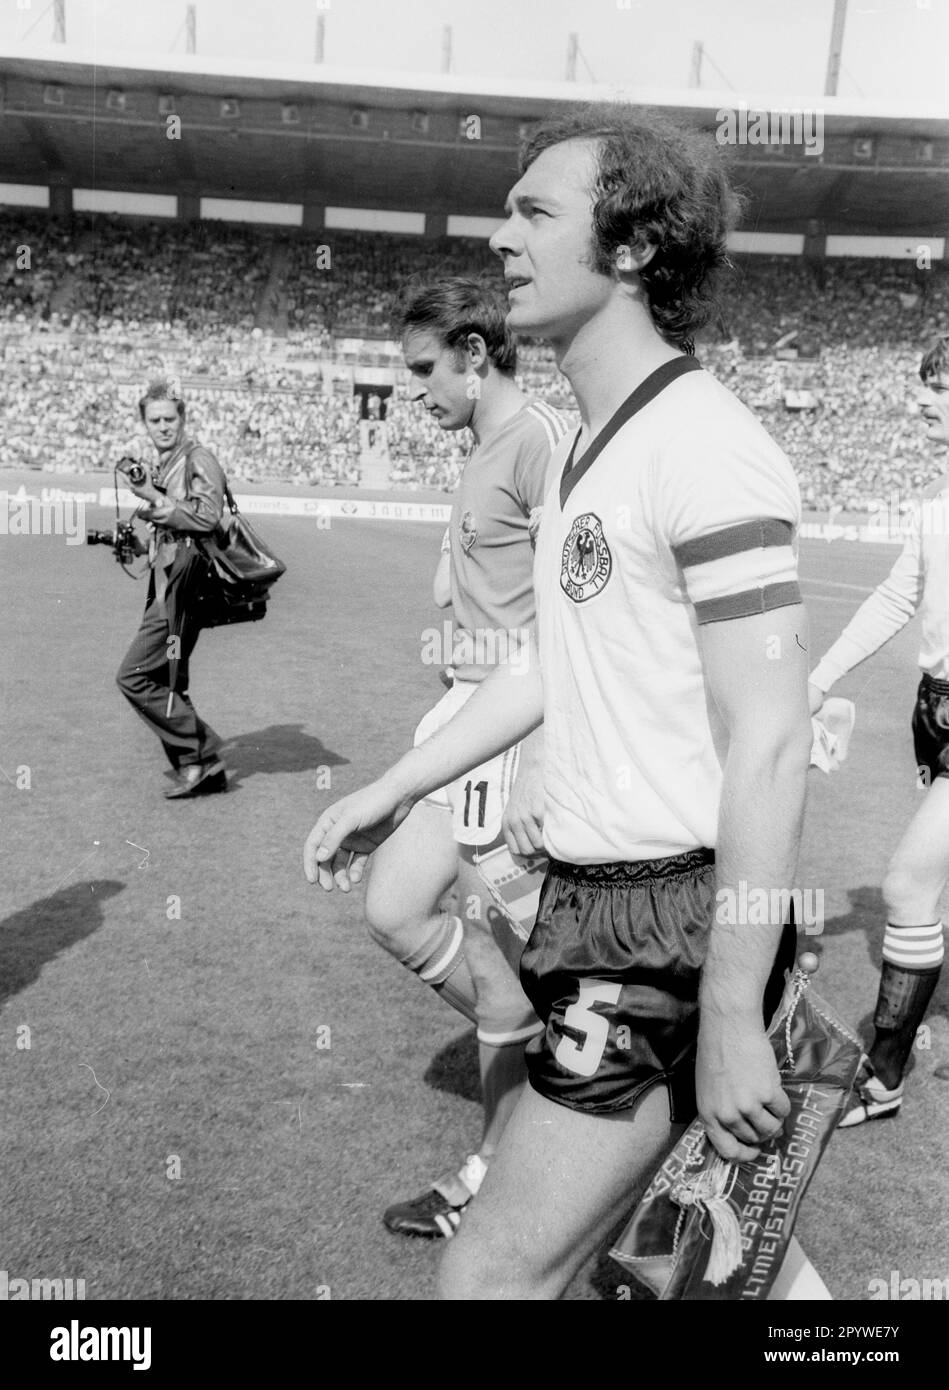 Soccer World Cup 1974 / Final round Group B / FRG - Yugoslavia 2:0 / 26.06.1974 in Duesseldorf / The two team captains: Franz Beckenbauer (Deut./front) and Dragan Dzajic (Yugoslavia) come onto the pitch. [automated translation] Stock Photo